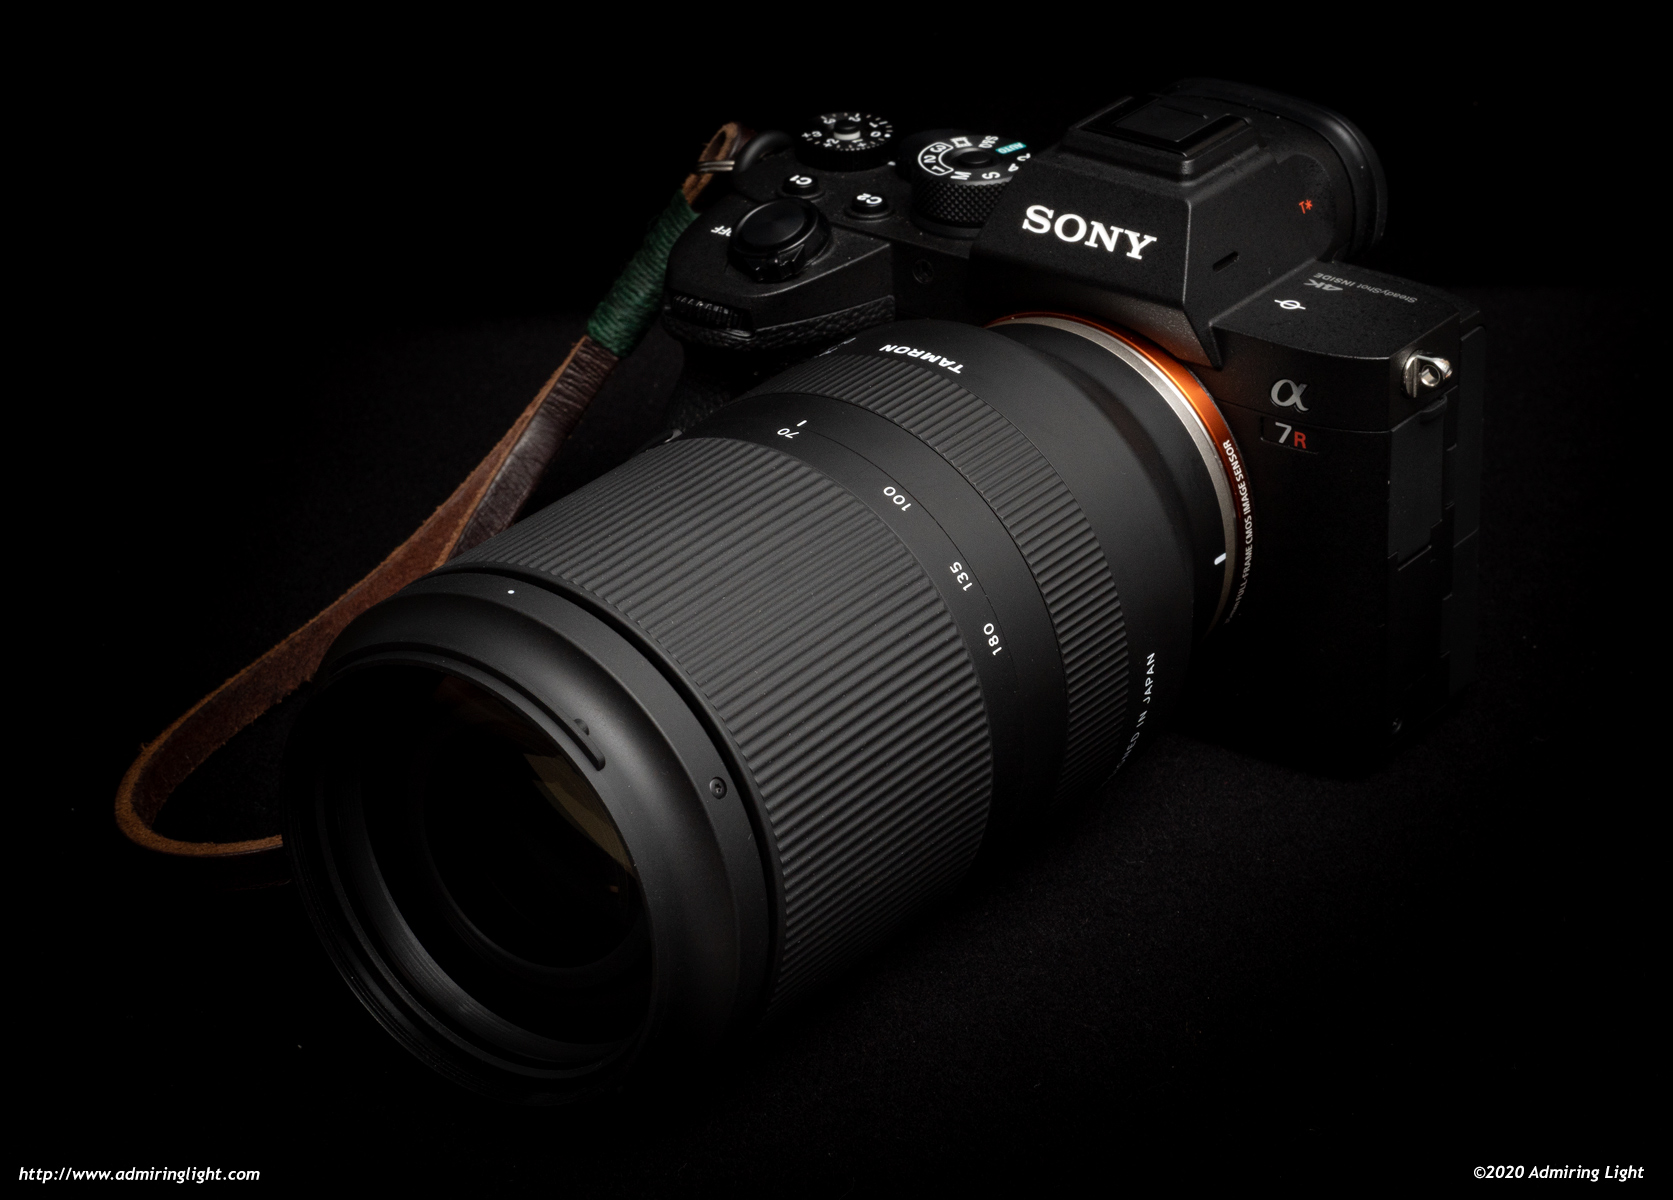 Review: Tamron 28-75mm f/2.8 Di III RXD (Sony E-Mount) - Admiring Light